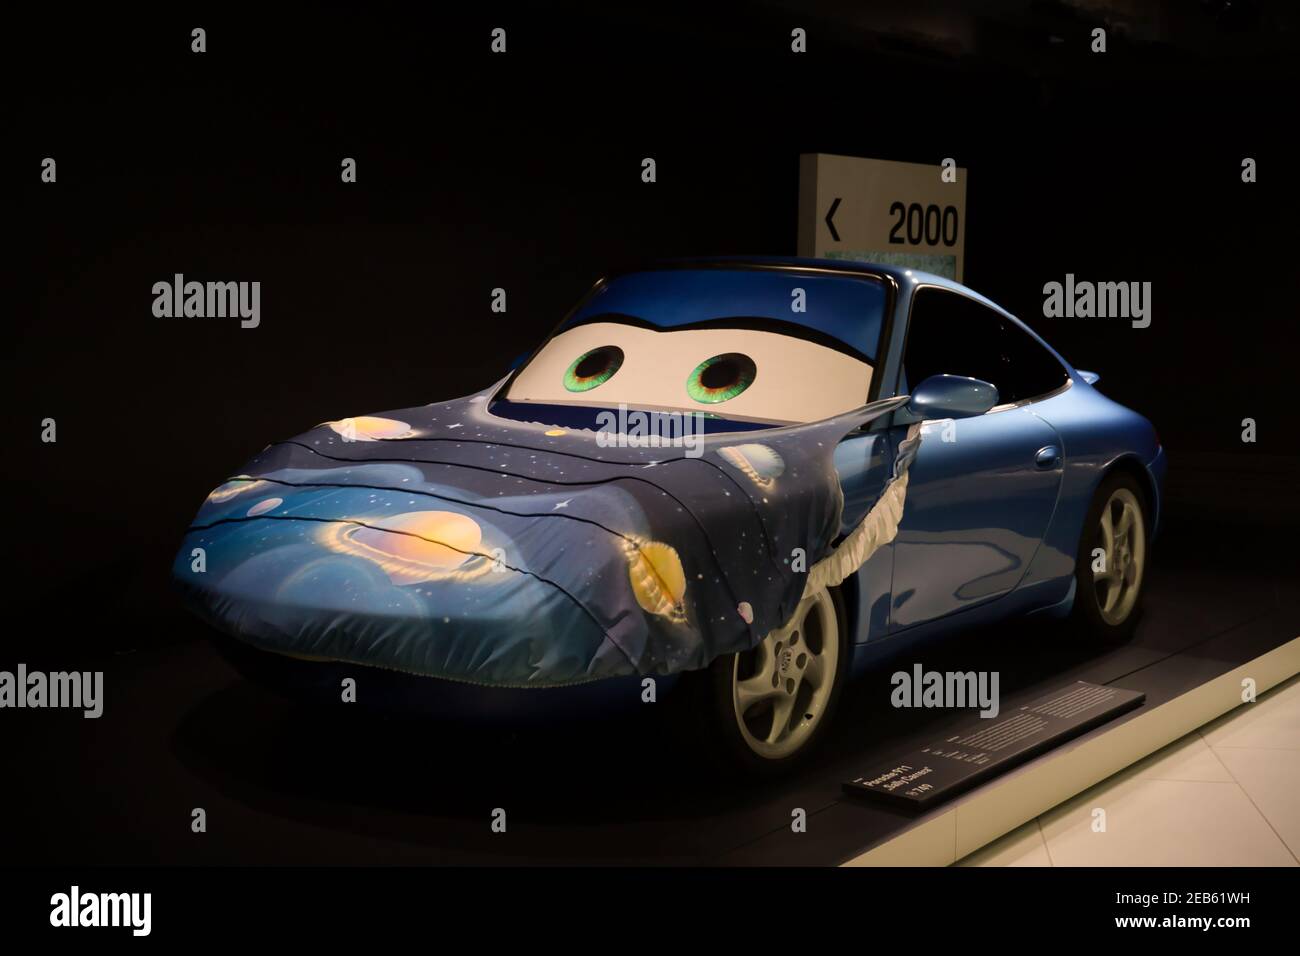 Sally Carrera, a character in the movie Cars, on display at the Porsche  museum in Stuttgart, Germany Stock Photo - Alamy